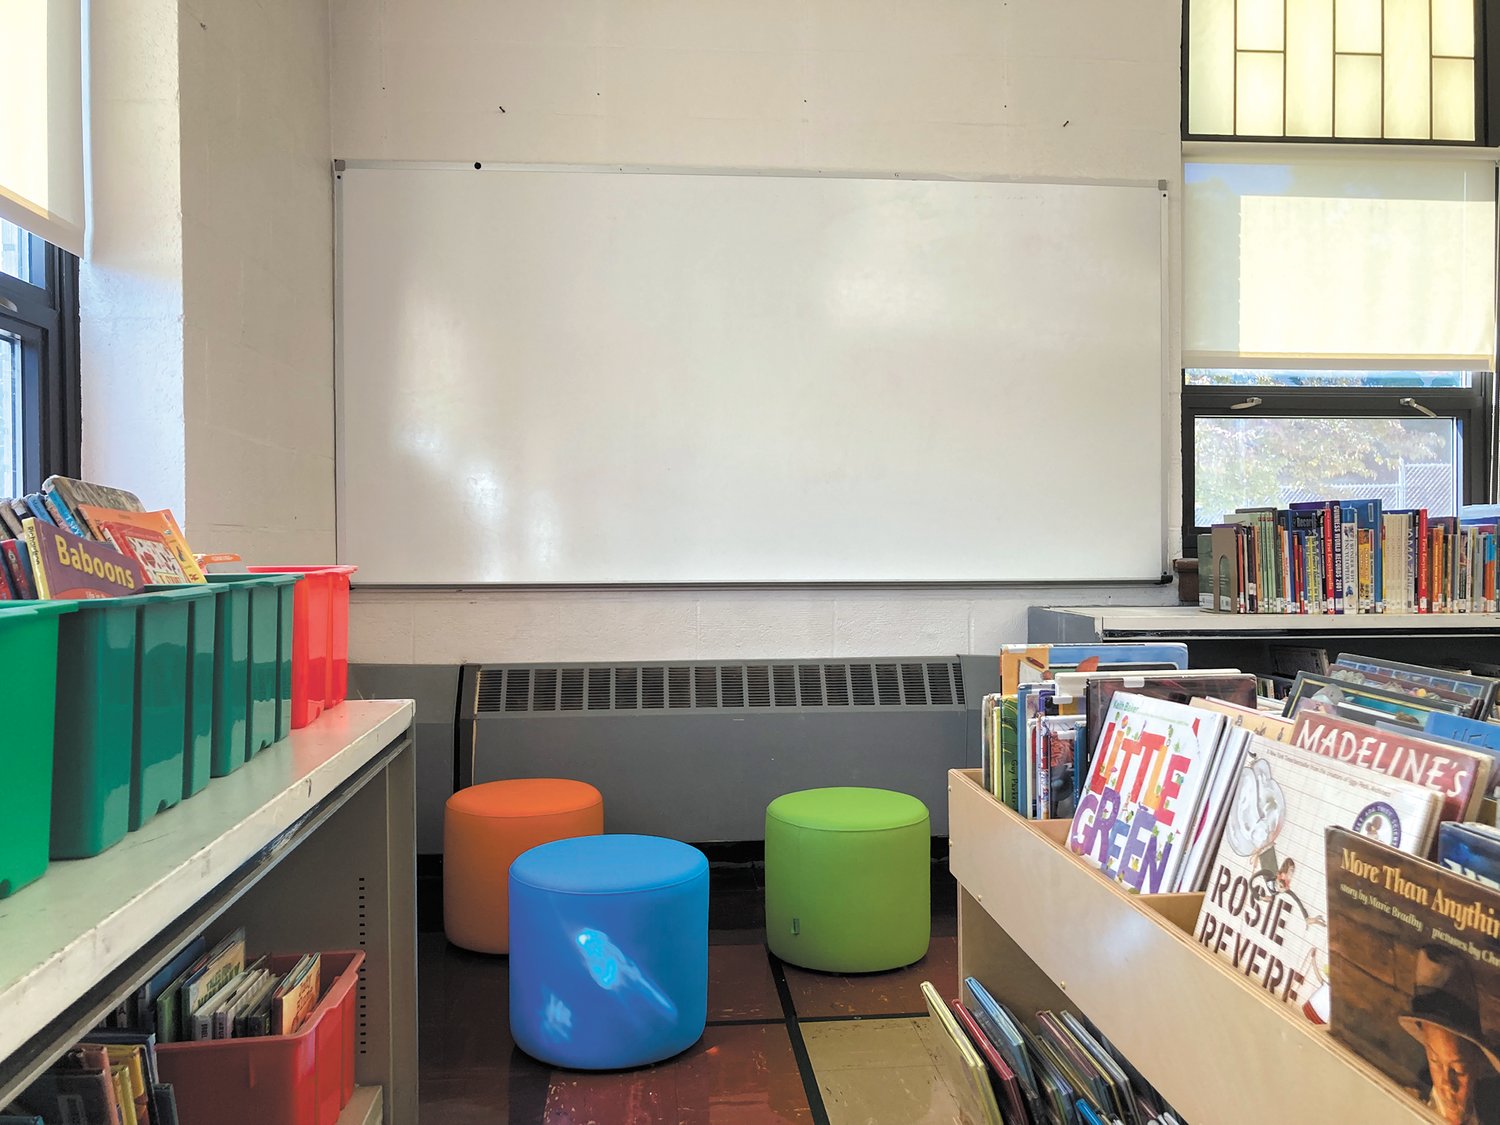 A QUIET, COZY NOOK: In the far corner of the library is a quiet nook where students can read or engage in group work. (Herald photo)